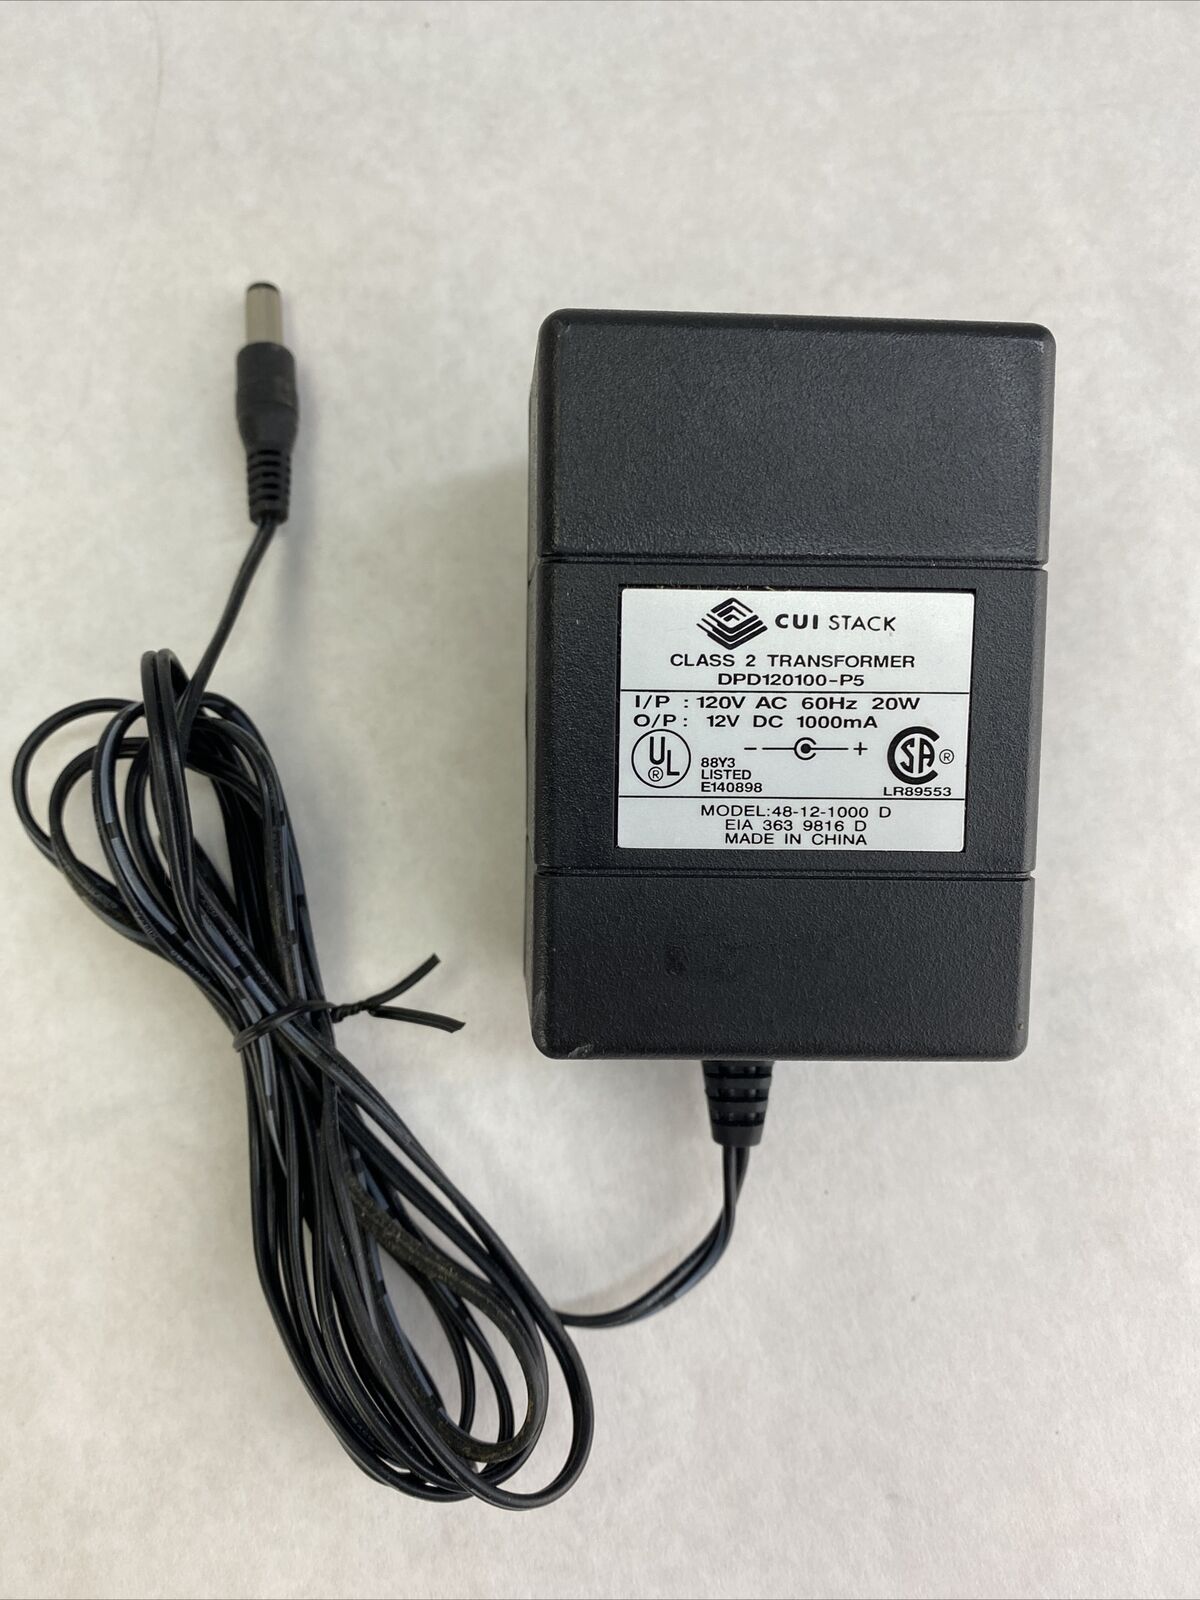 CUI Stack DPD120100-P5 Power Adapter 48-12-1000D 12VDC 1000mA